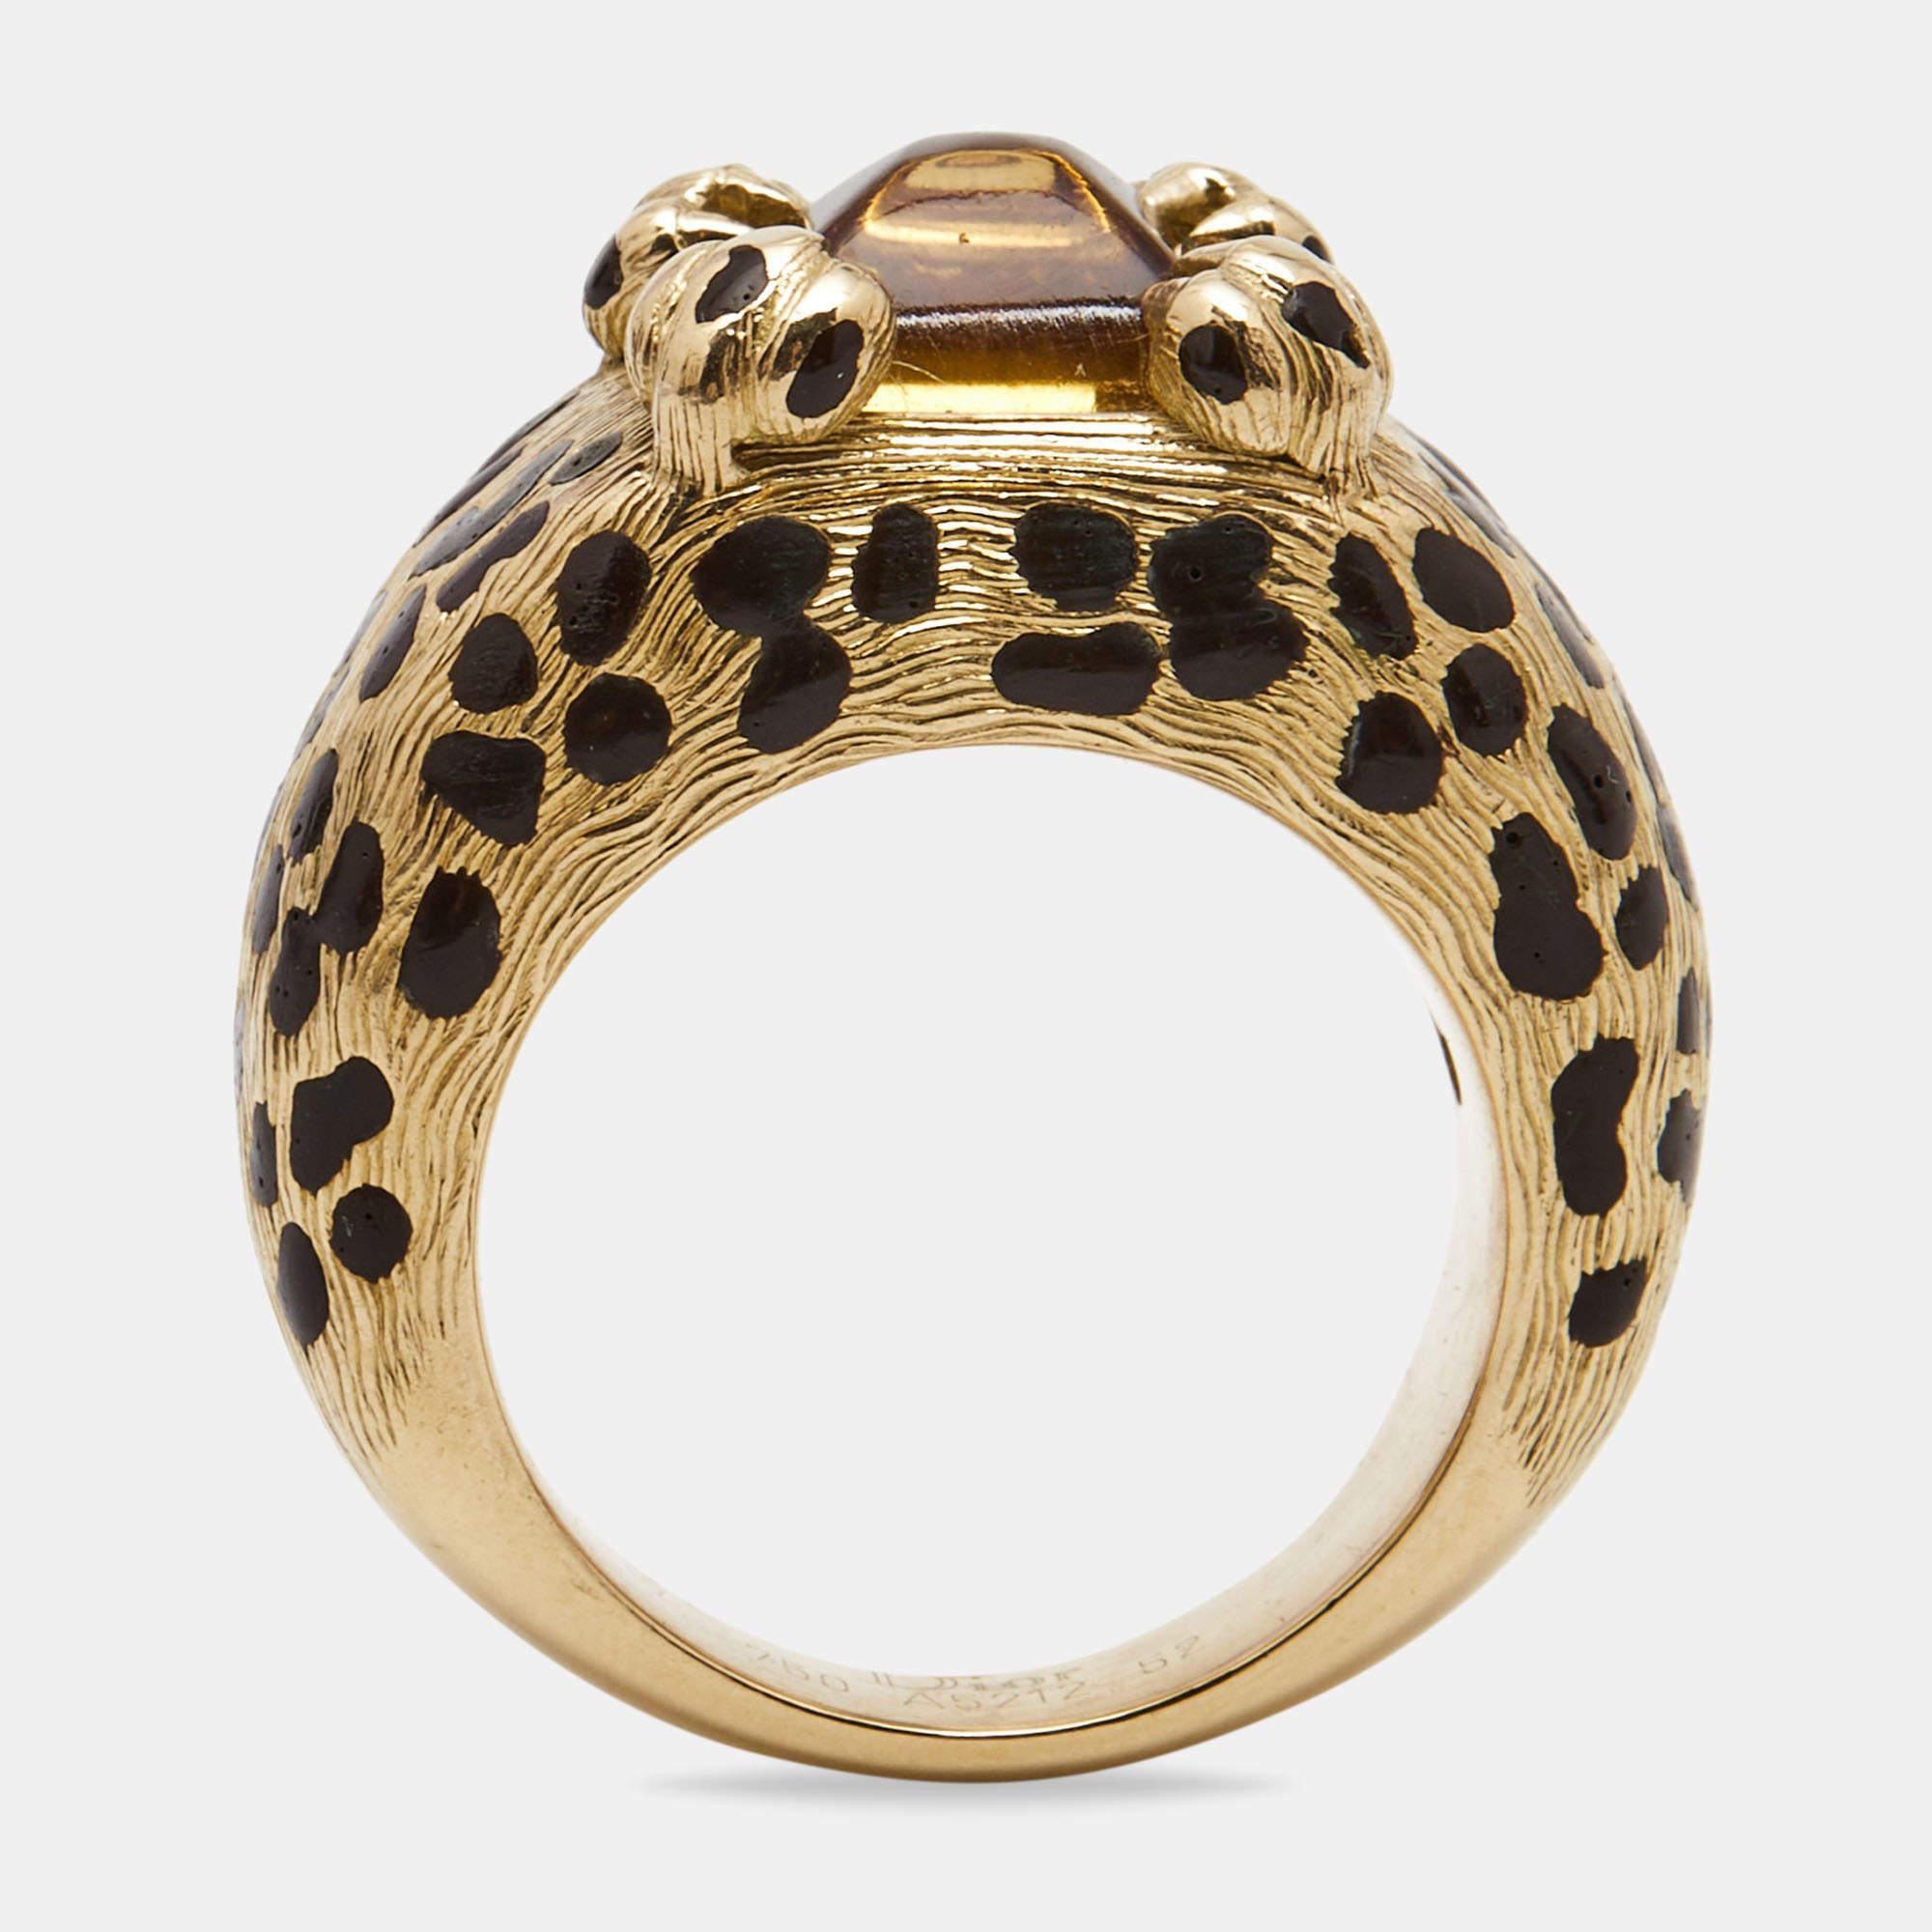 To adorn your fingers in the most elegant way, we bring you this Dior ring. It has been carved using 18k yellow gold with leopard details to elevate your look instantly.

